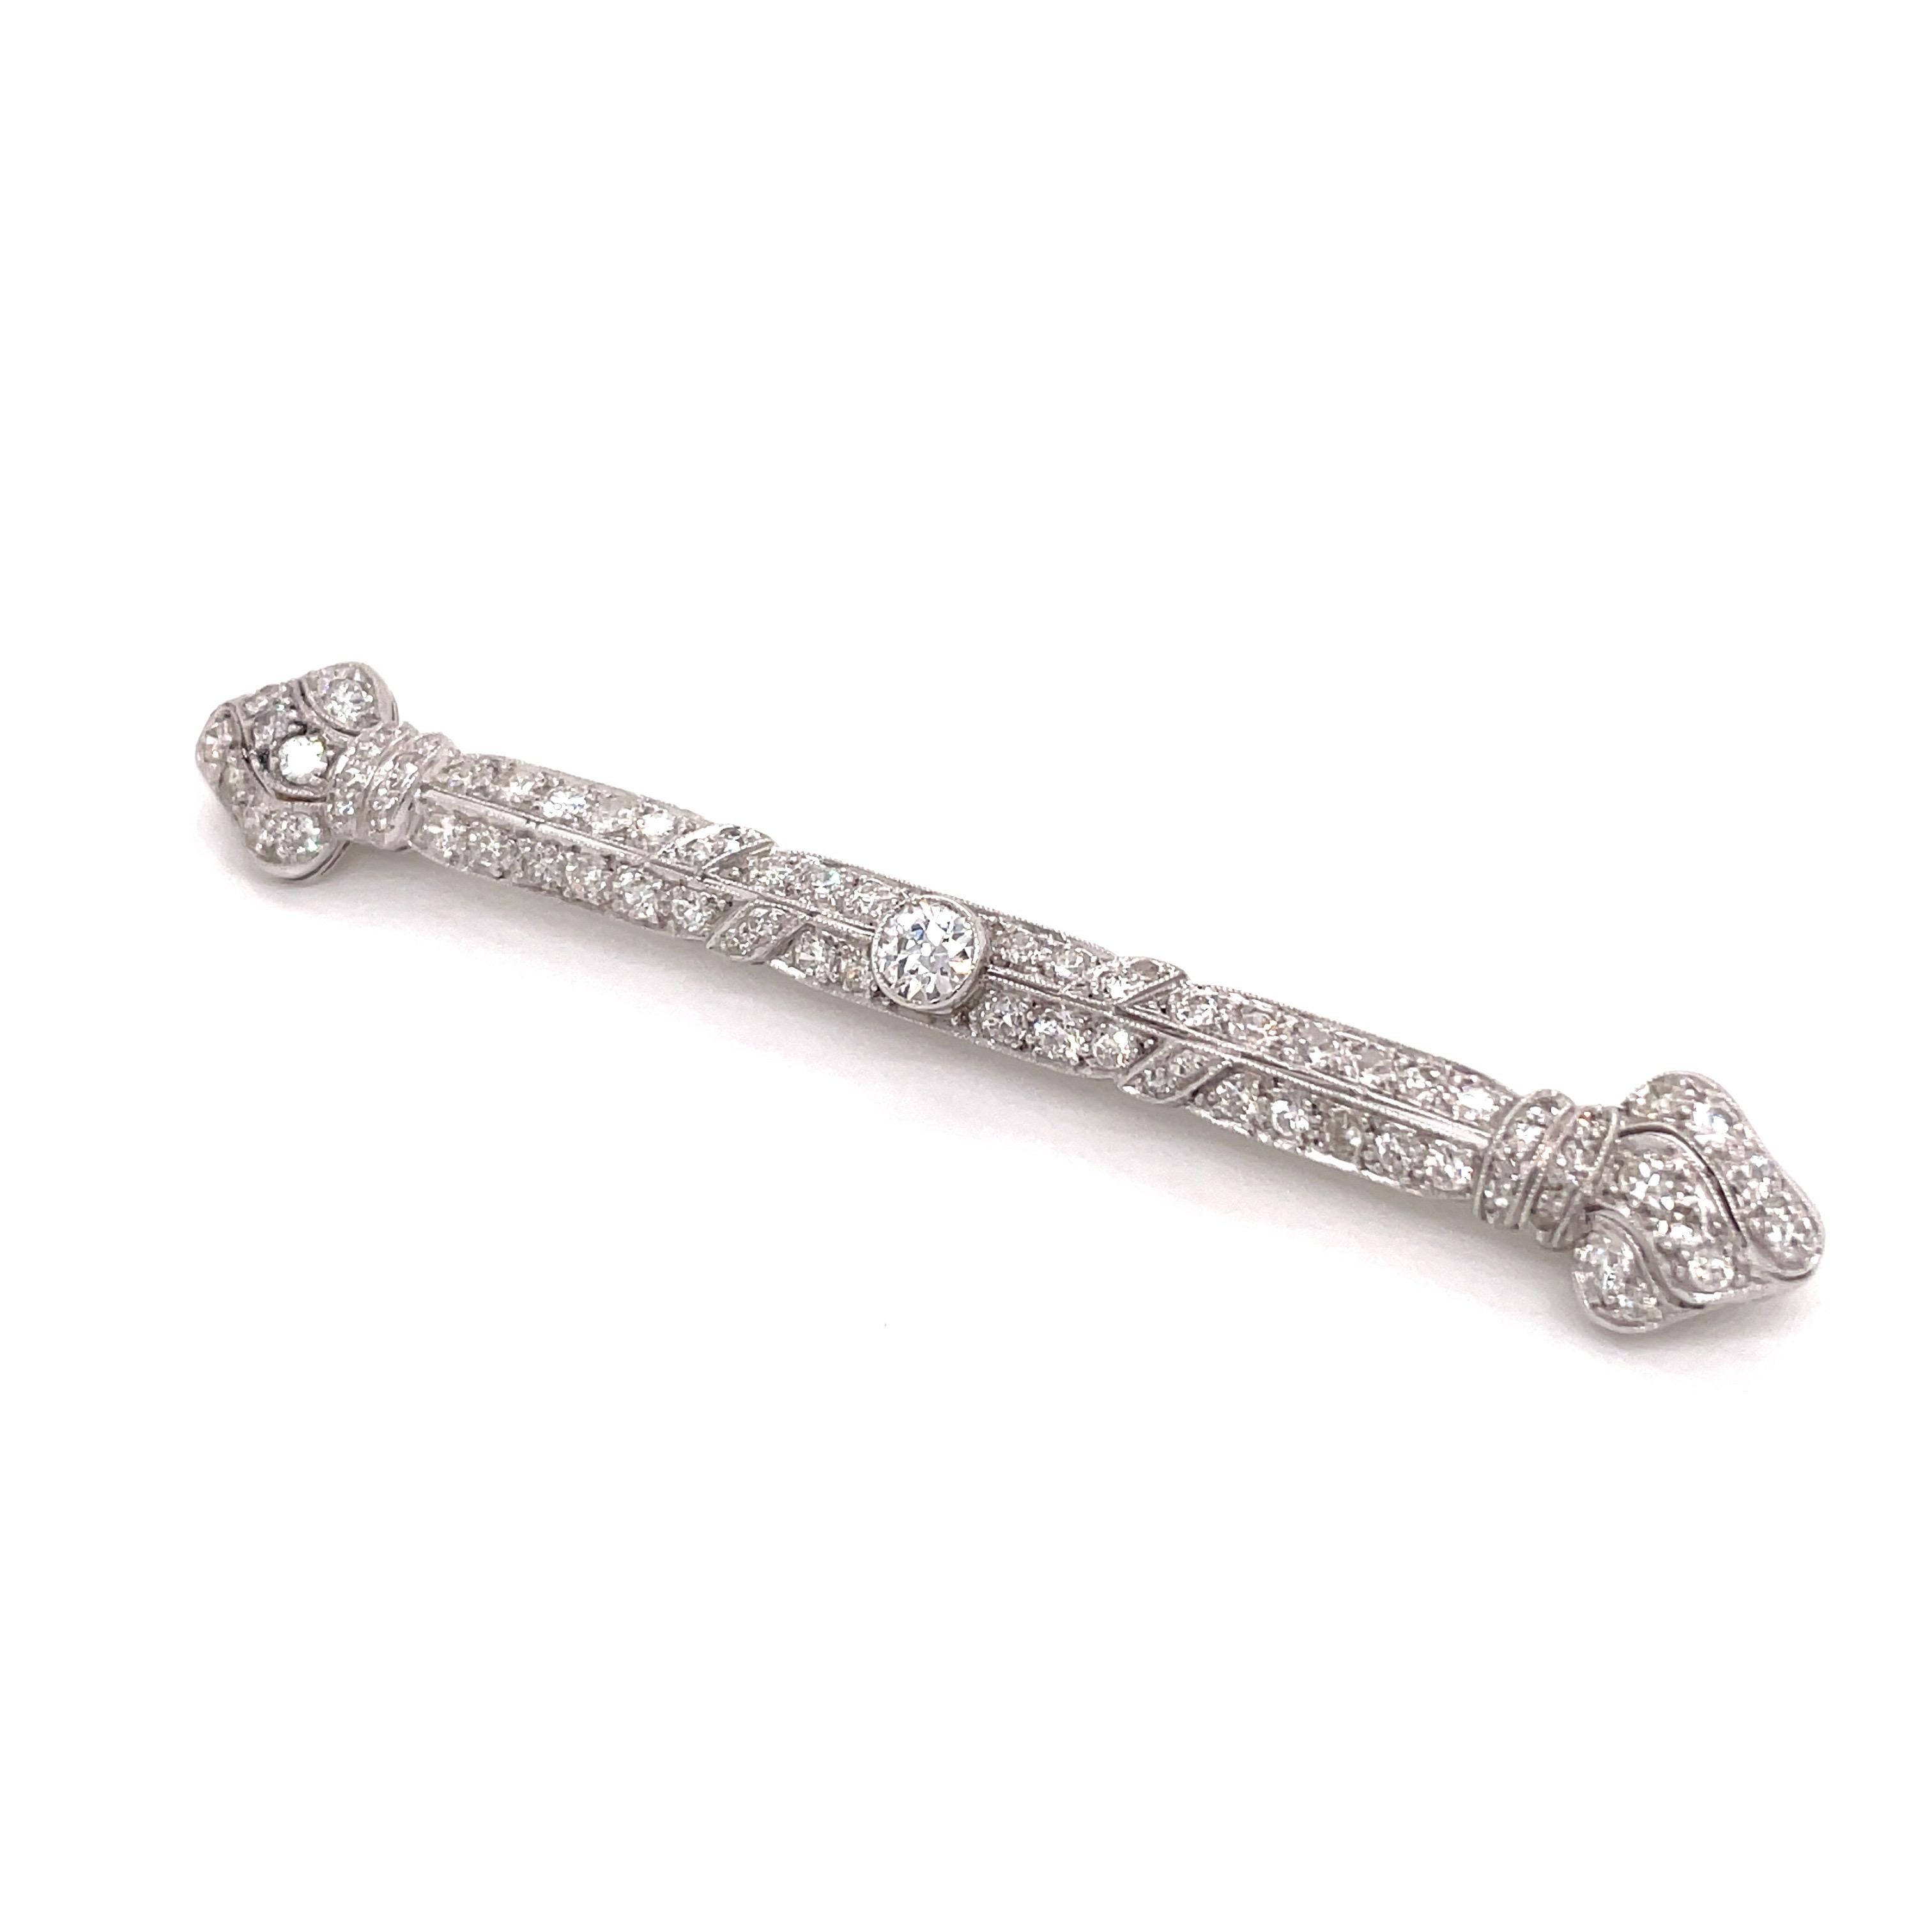 This exceptional antique bar pin is a stunning representation of the Art Deco era's elegant sophistication and unparalleled craftsmanship. Rendered in lustrous platinum, it showcases a sleek and streamlined design that epitomizes the period's